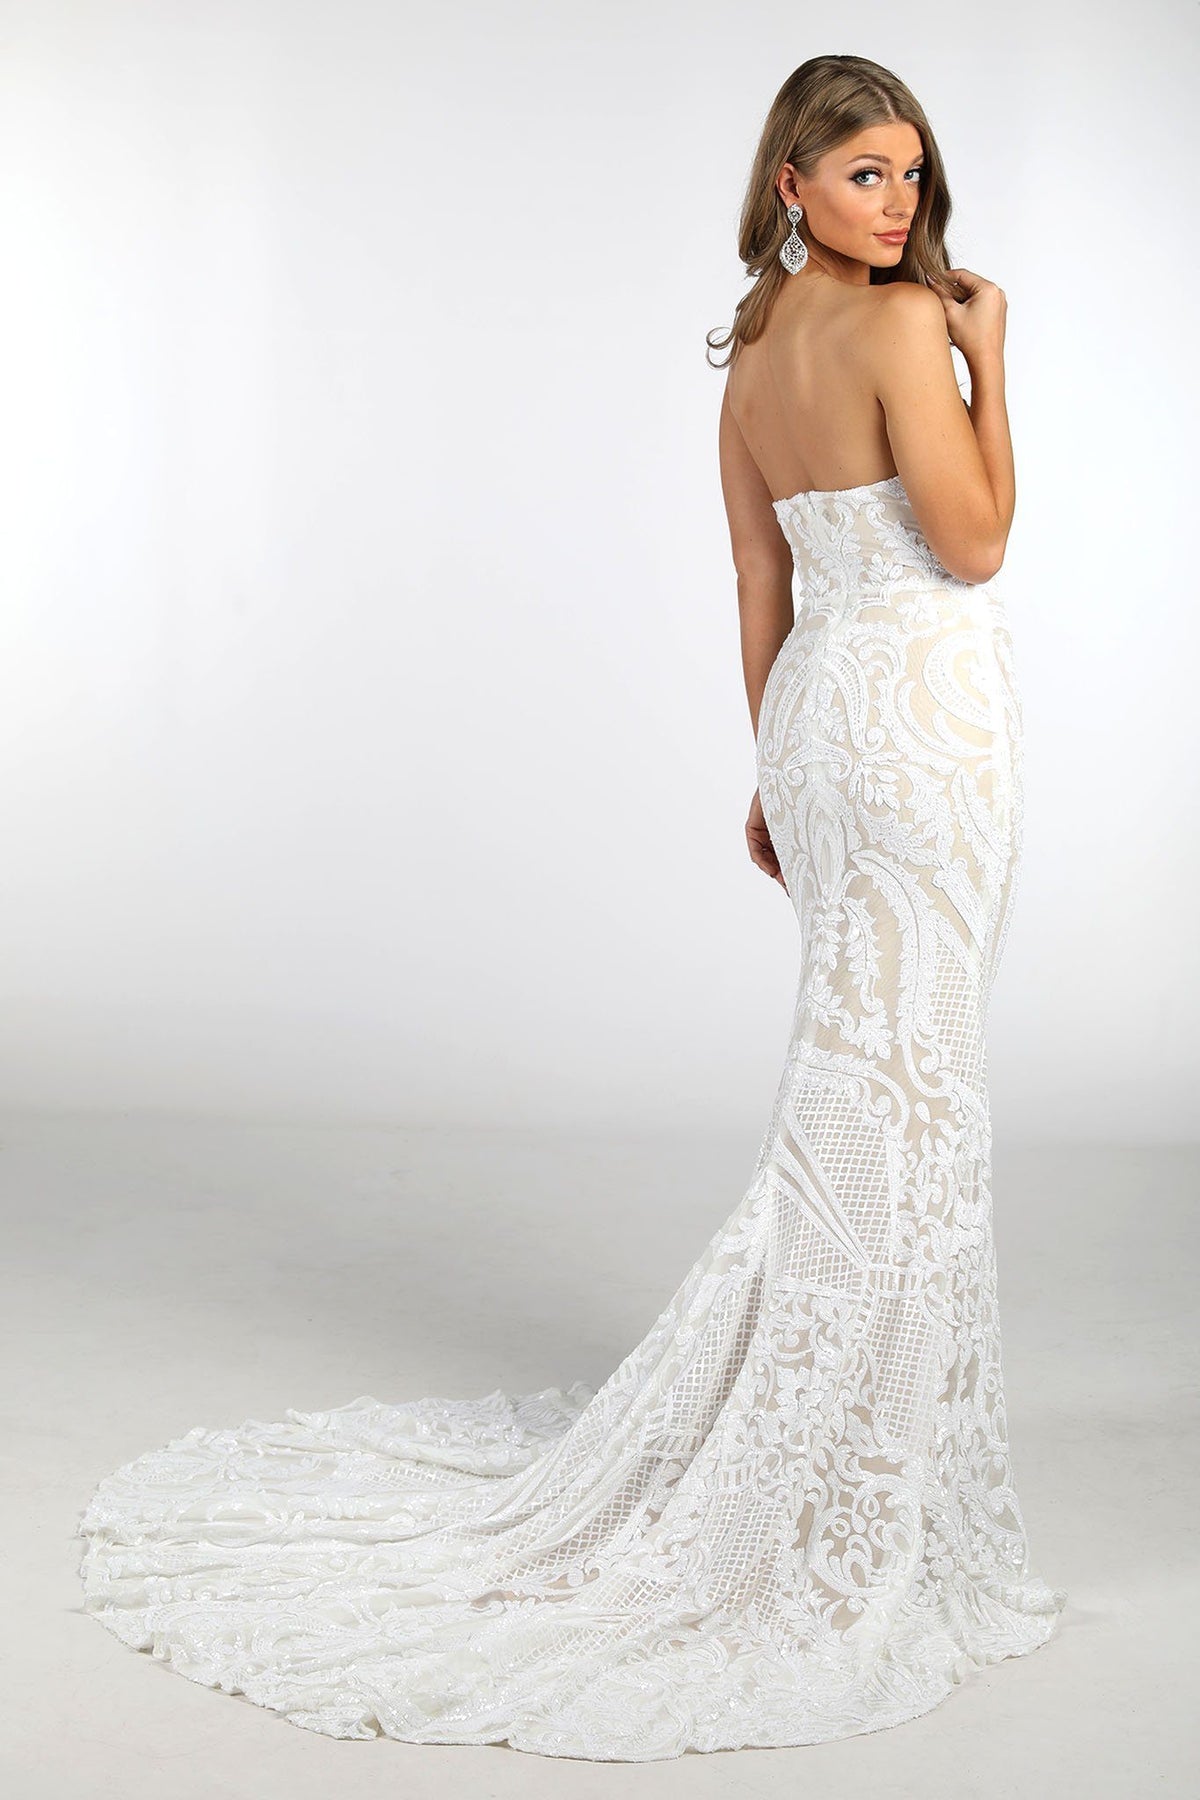 Open Back Long Train Design of White Embroidered Pattern Sequin with Nude Lining Floor Length Evening Dress with Strapless Sweetheart Neckline and Mermaid Skirt